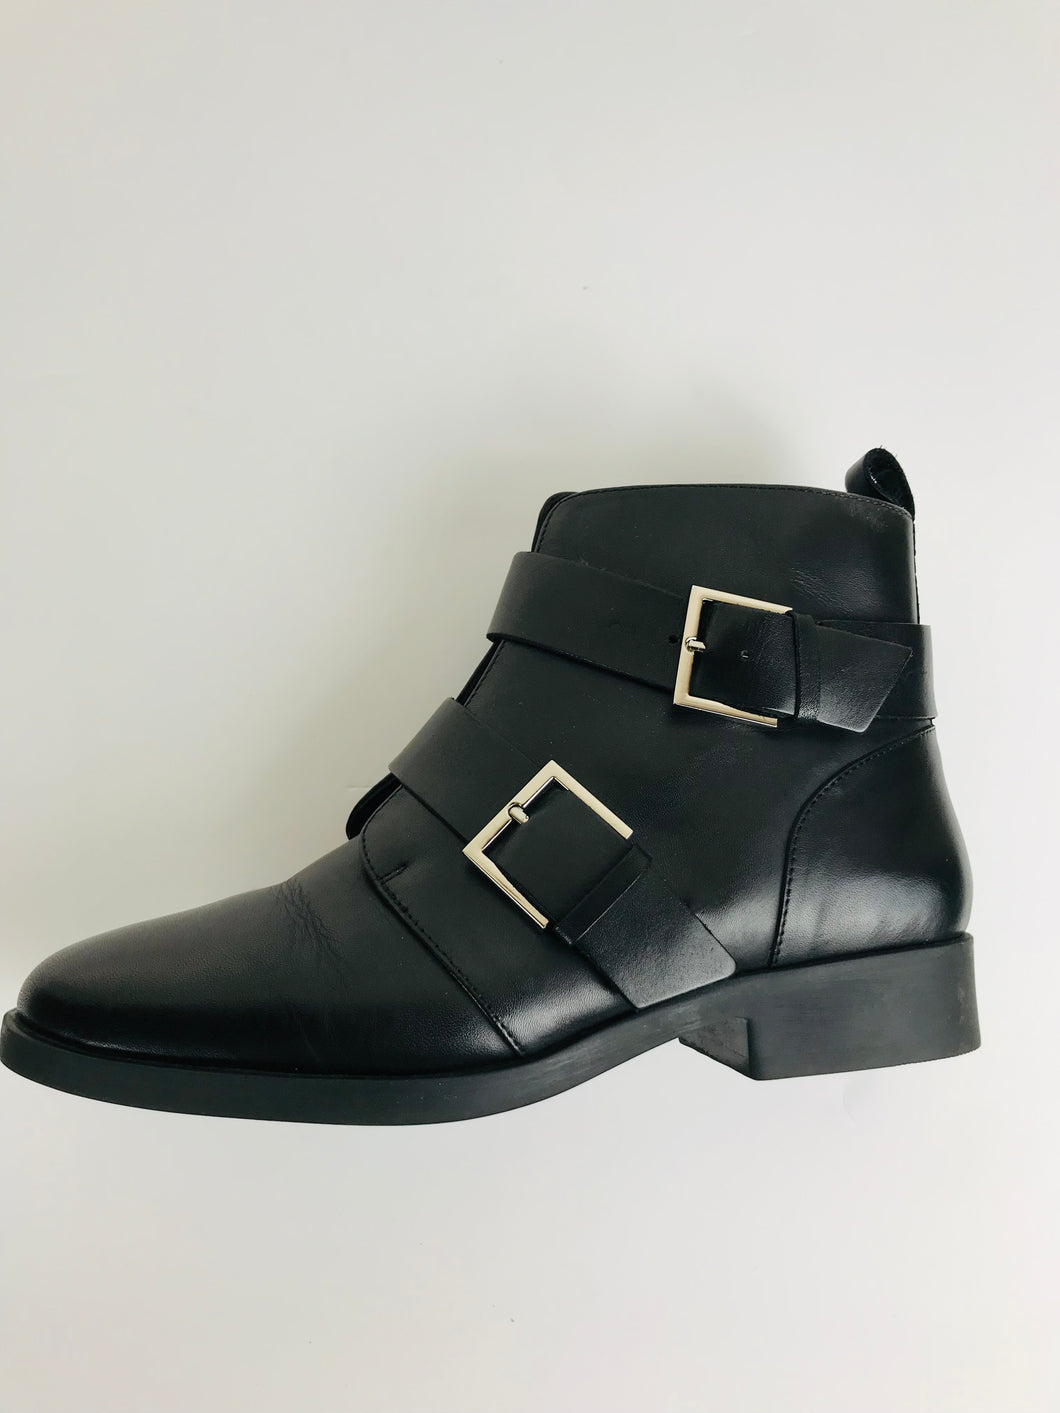 Joules Women's Leather Boots | UK6 | Black